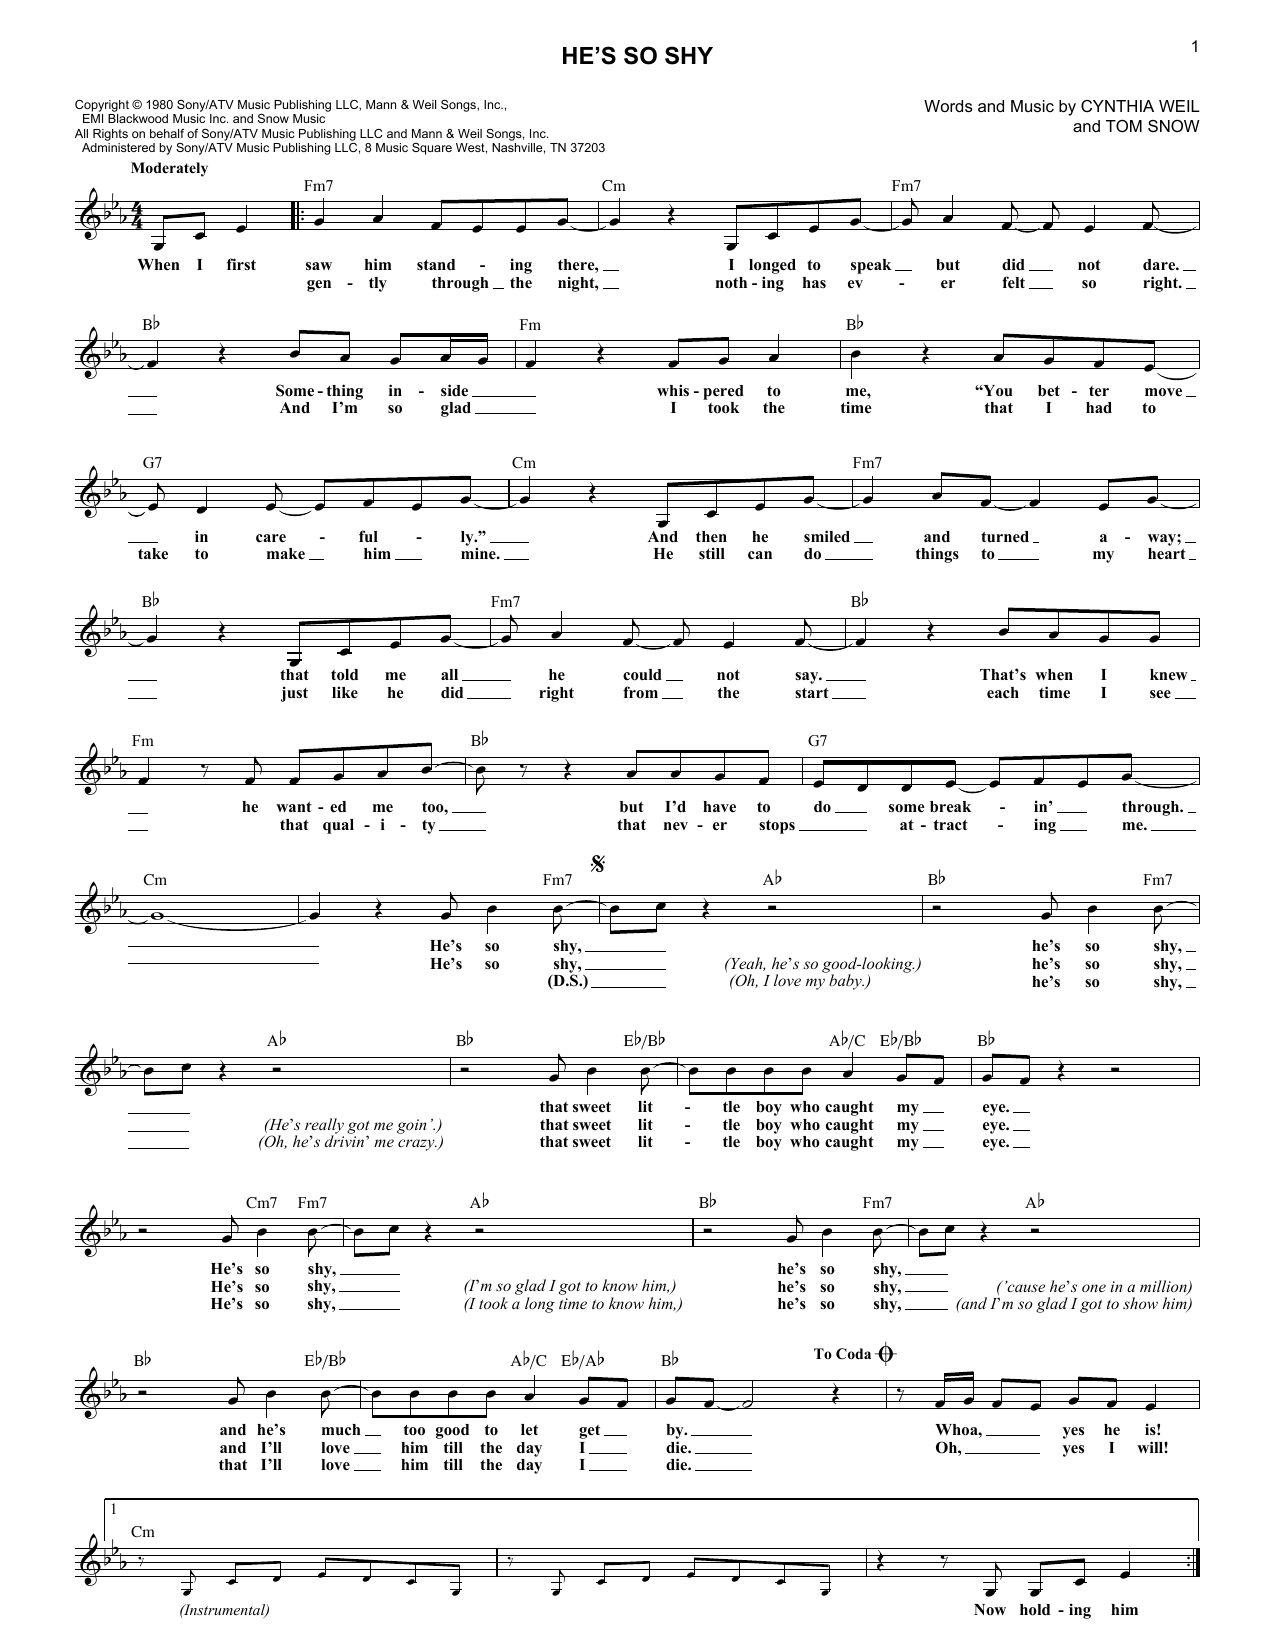 Download The Pointer Sisters He's So Shy Sheet Music